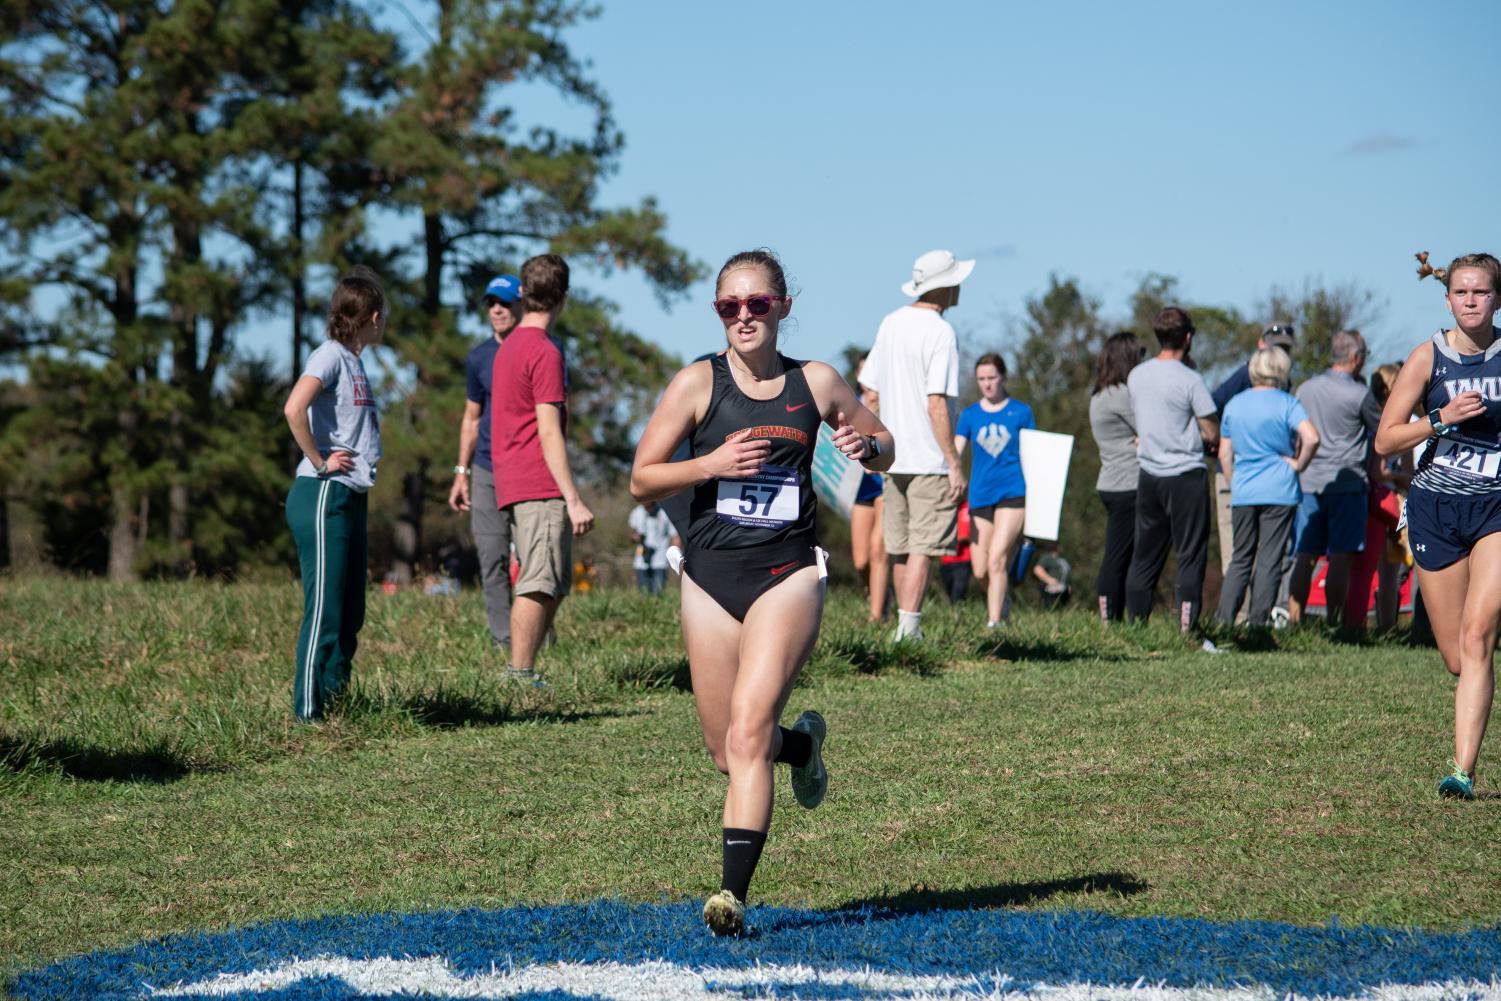 Bridgewater+Women%E2%80%99s+Cross+Country+Team+Places+11th+at+Regionals